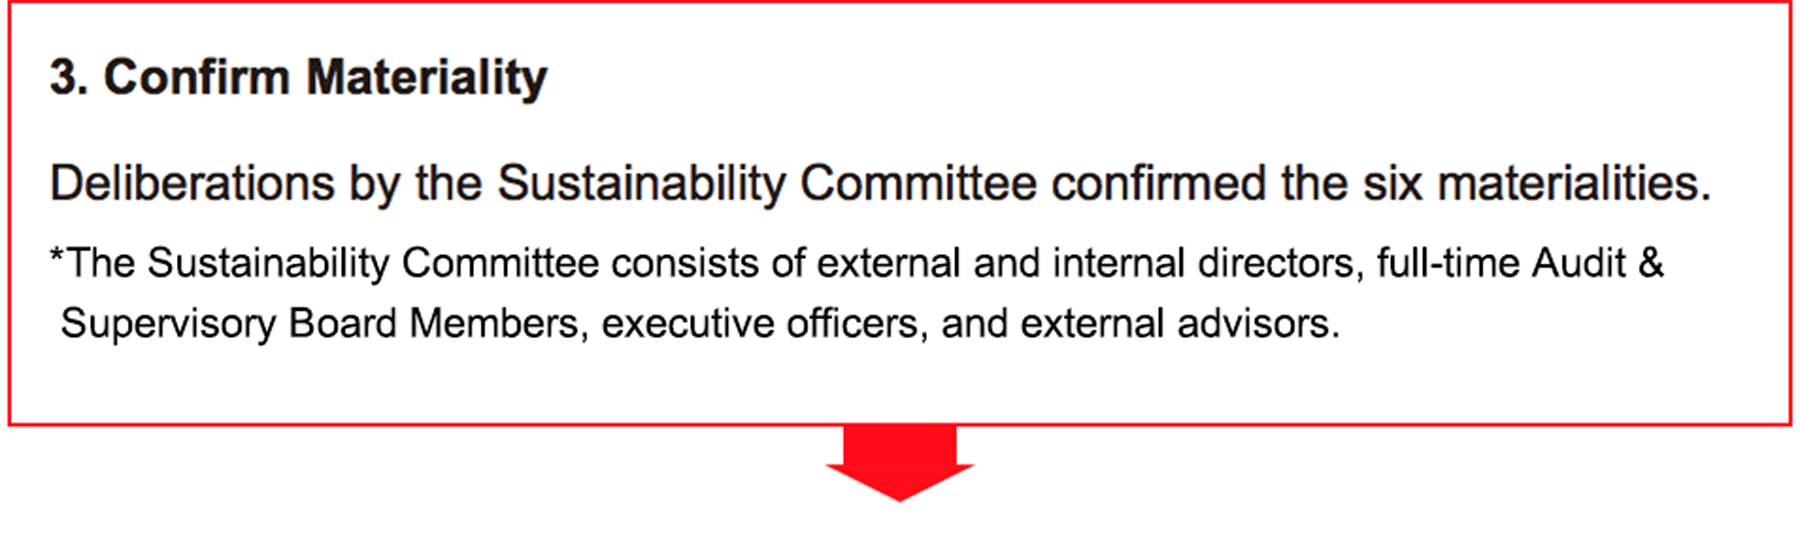 3. Confirm Materiality　　
Deliberations by the Sustainability Committee confirmed the six materialities.
*The Sustainability Committee consists of external and internal directors, full-time members of the Audit and Supervisory Board, executive officers, and external advisors.